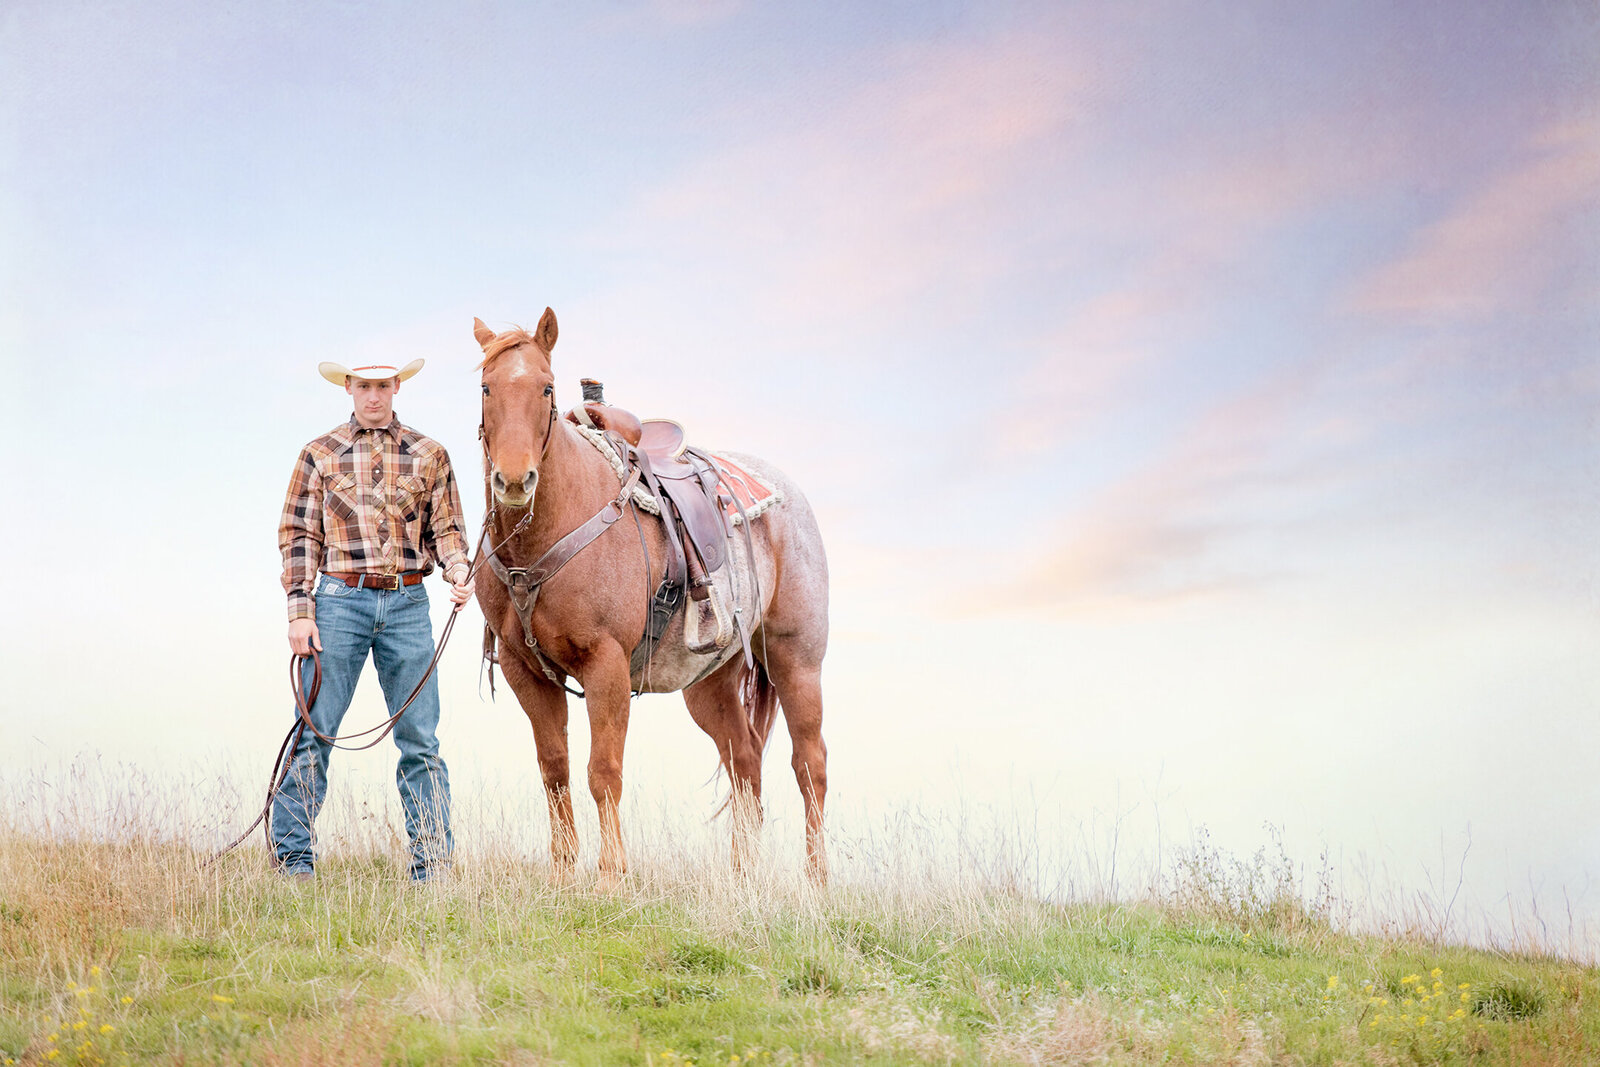 High School Senior Picture with horse. Western picture, Billings Montana. Cowboy and his horse. Cowboy hat.